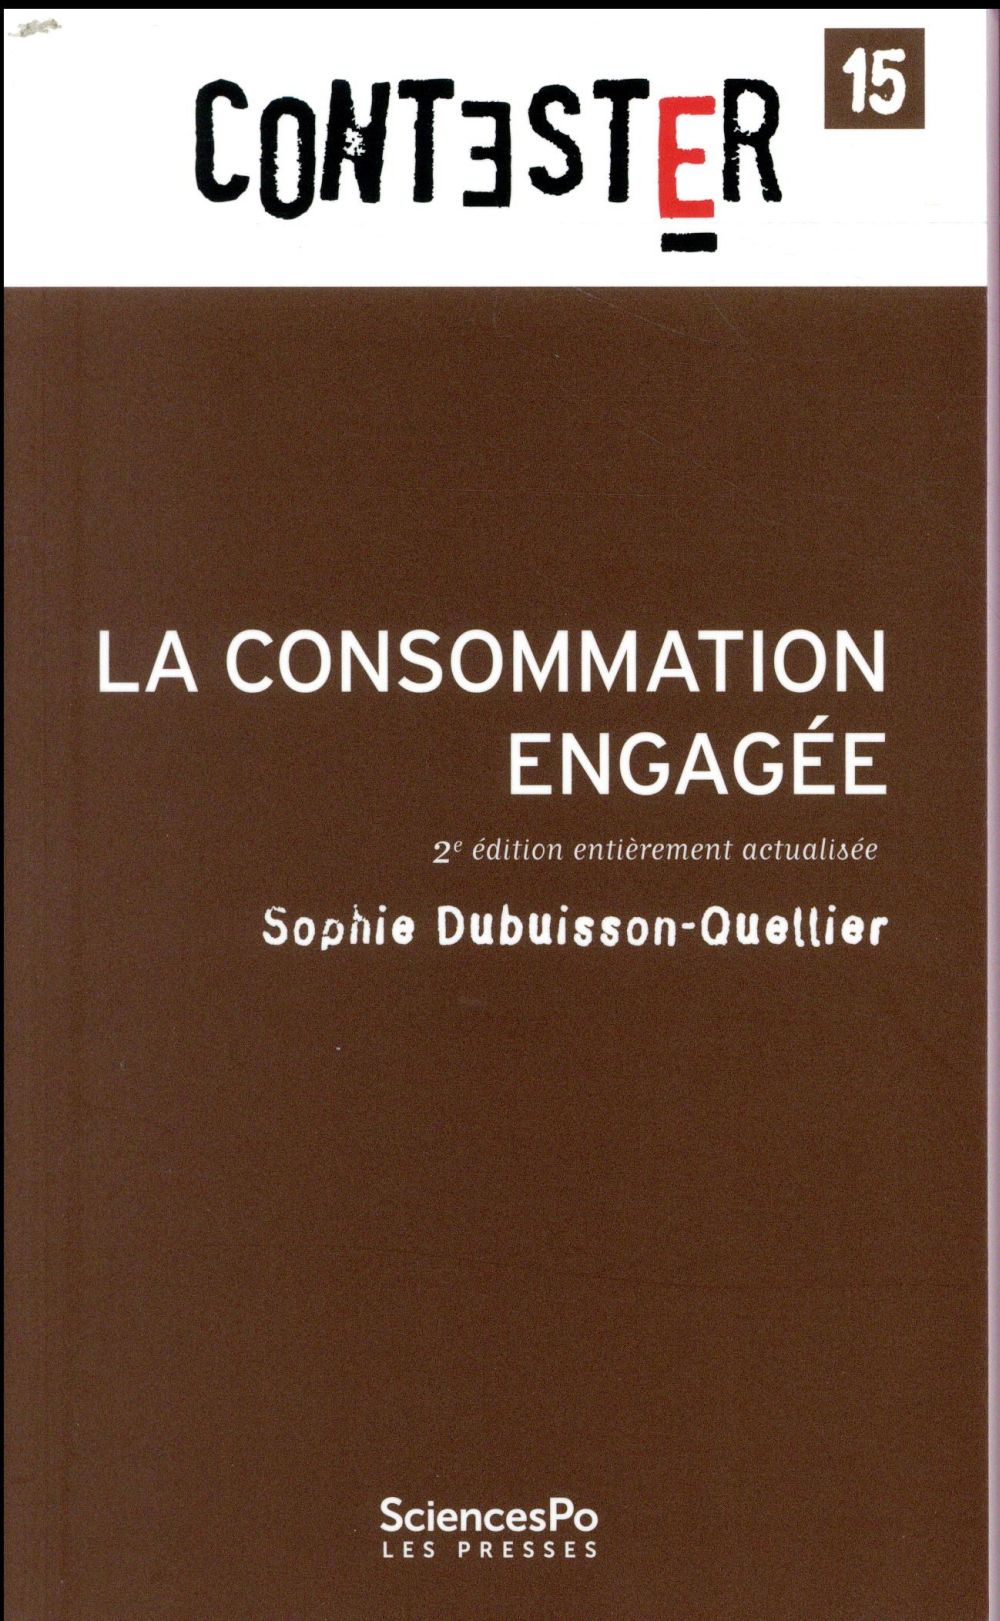 LA CONSOMMATION ENGAGEE - 2E EDITION ENTIEREMENT ACTUALISEE